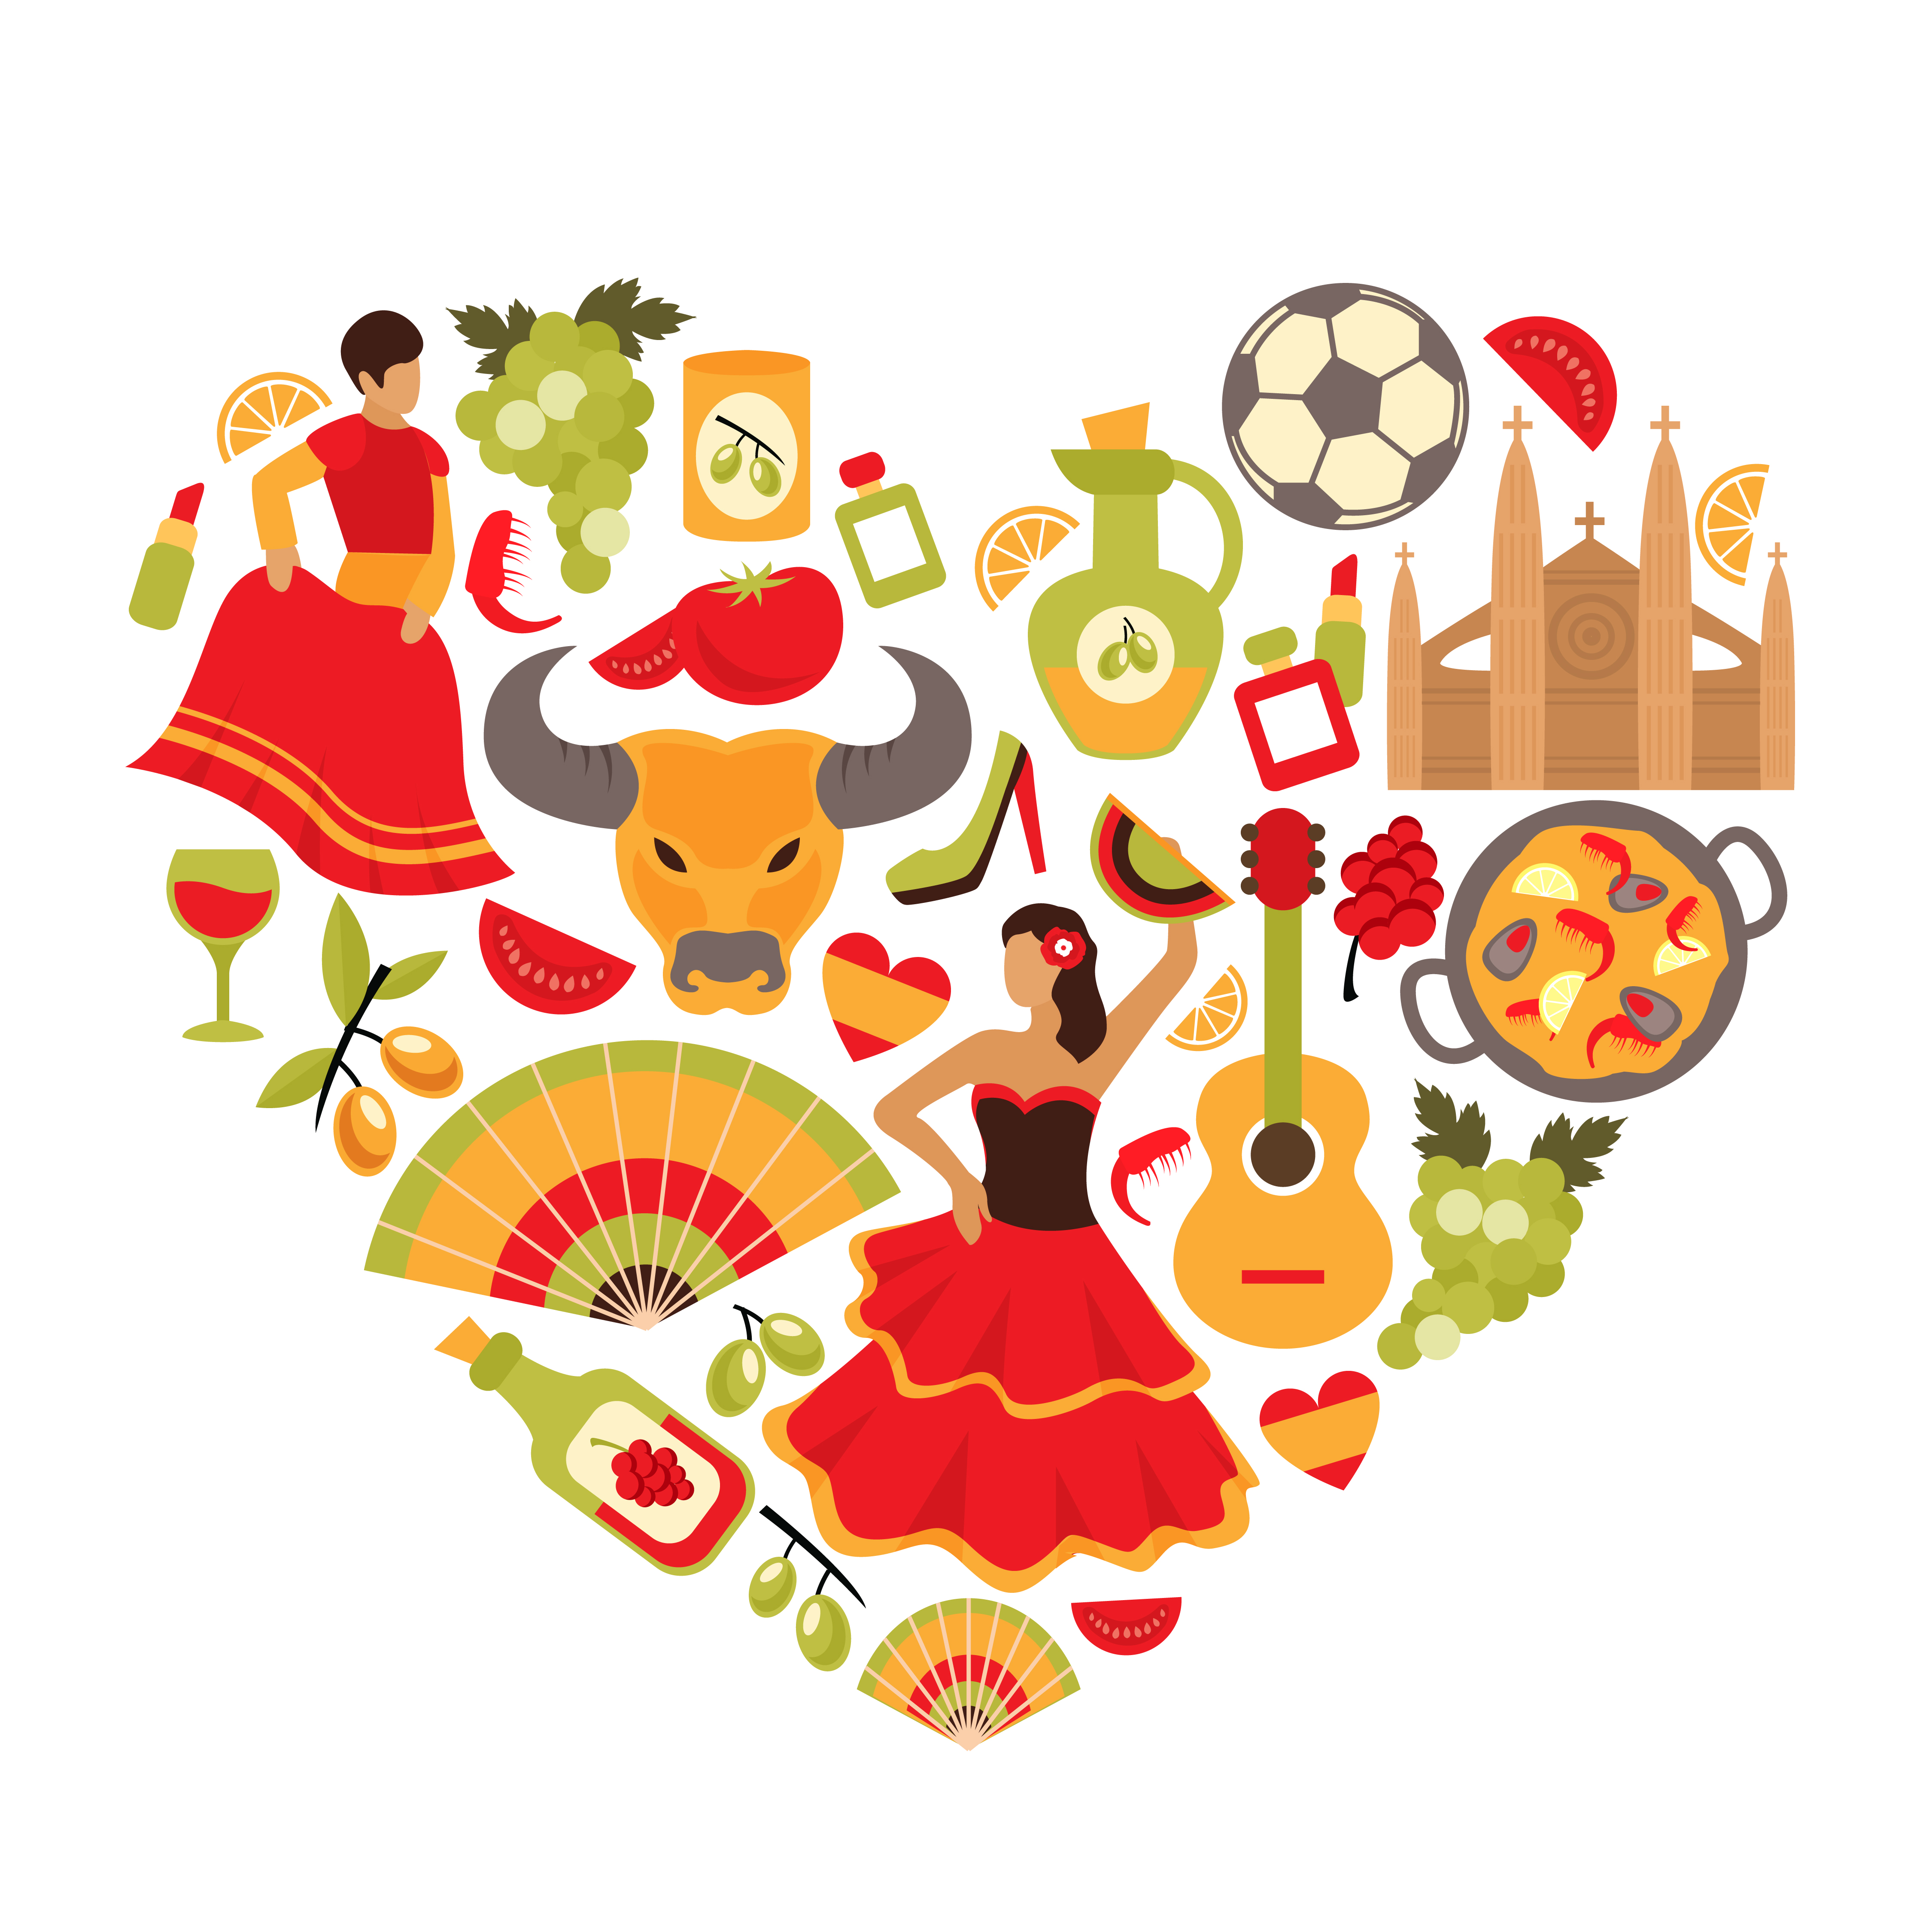 Heart shaped graphic of various Spanish cultural items